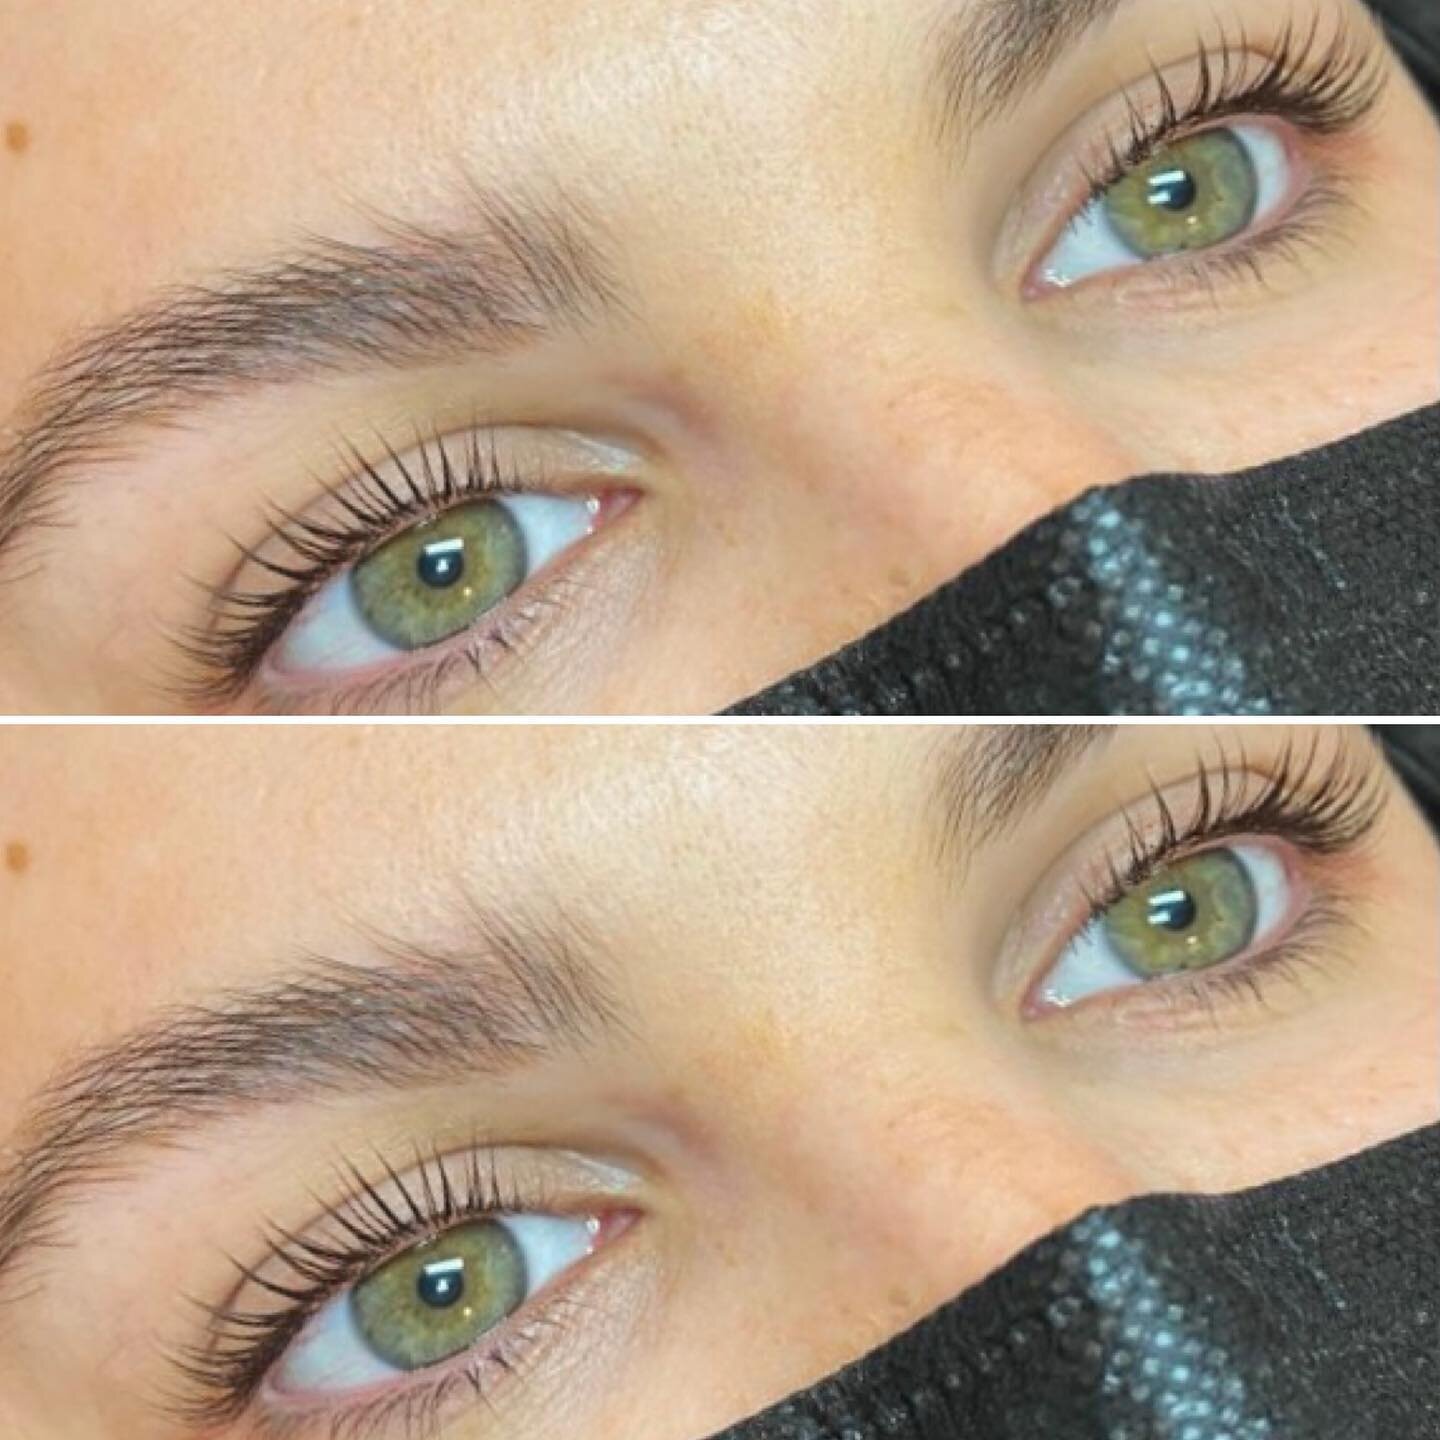 Bright eyed beauty 💚 Our lash lift and tint is the best way to enhance your lashes for summer! Only $95 🍭 To book any apppointments at our studio, be sure to fill out the contact form on our website ✨ @rachel_lashes_jenevoystudio